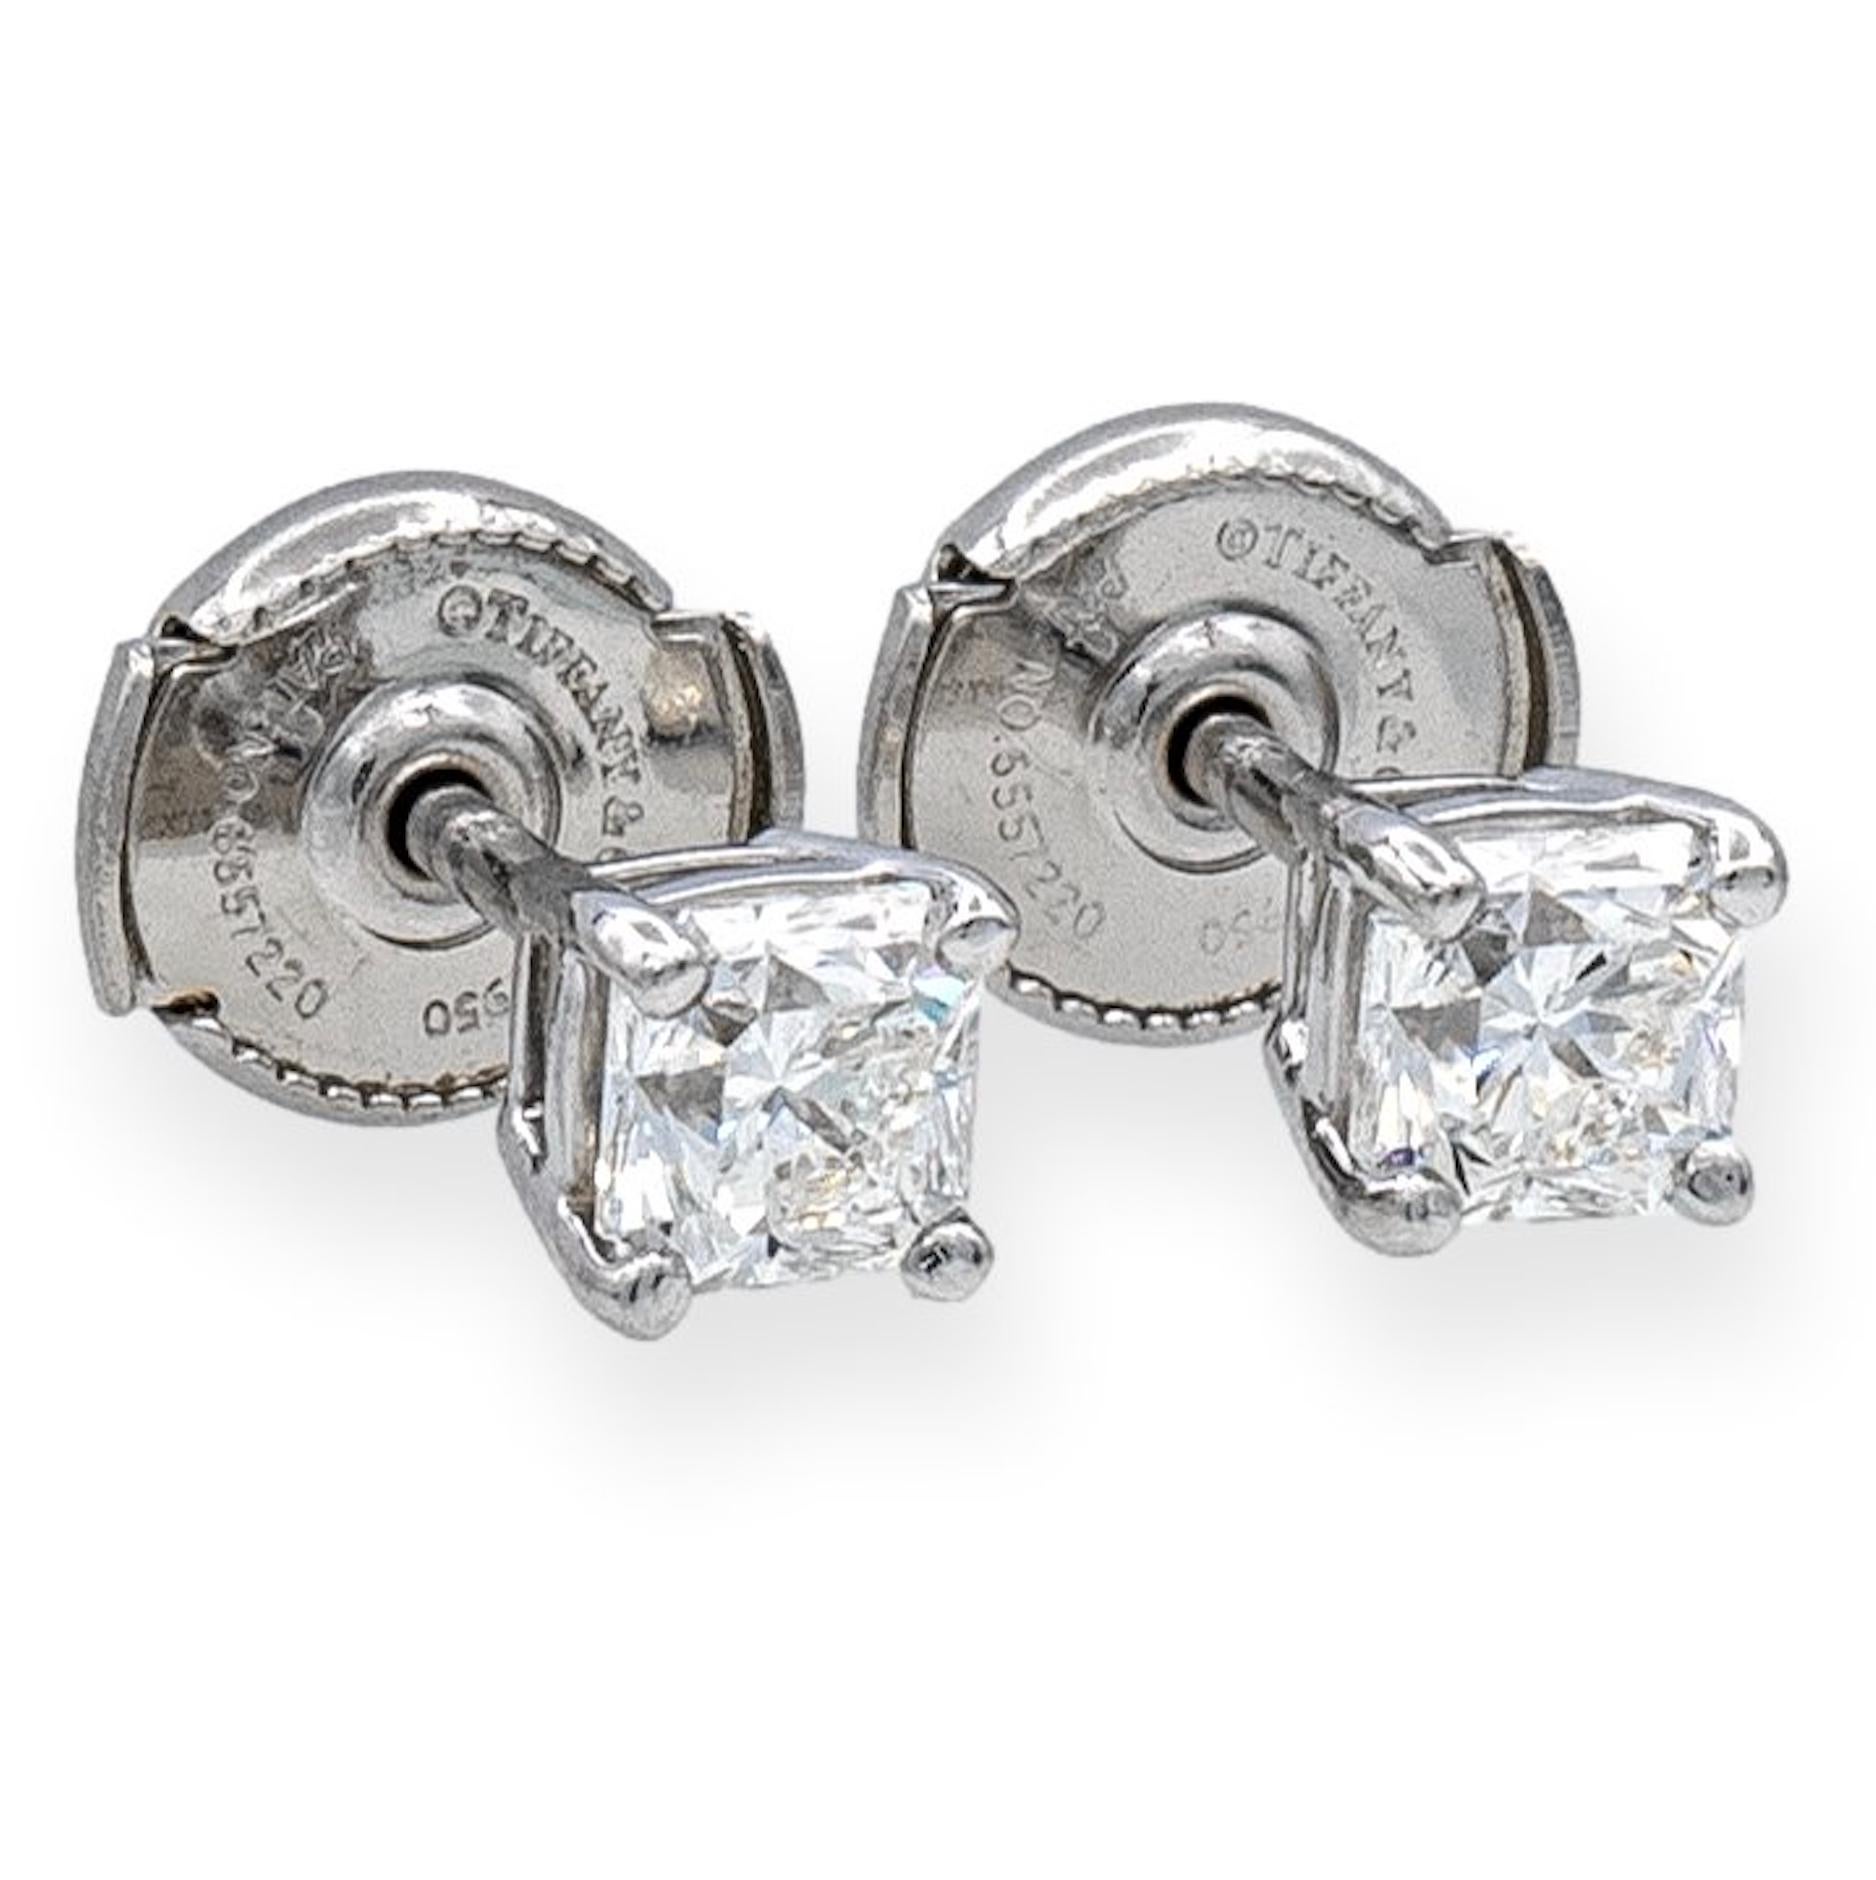 Pair of Tiffany & Co. Diamond Stud earrings from the Lucida cut collection finely crafted in a Platinum 4 prong basket setting featuring two perfectly matched cut-cornered mixed cut brilliant cut diamonds weighing 0.90 carats total weight. One